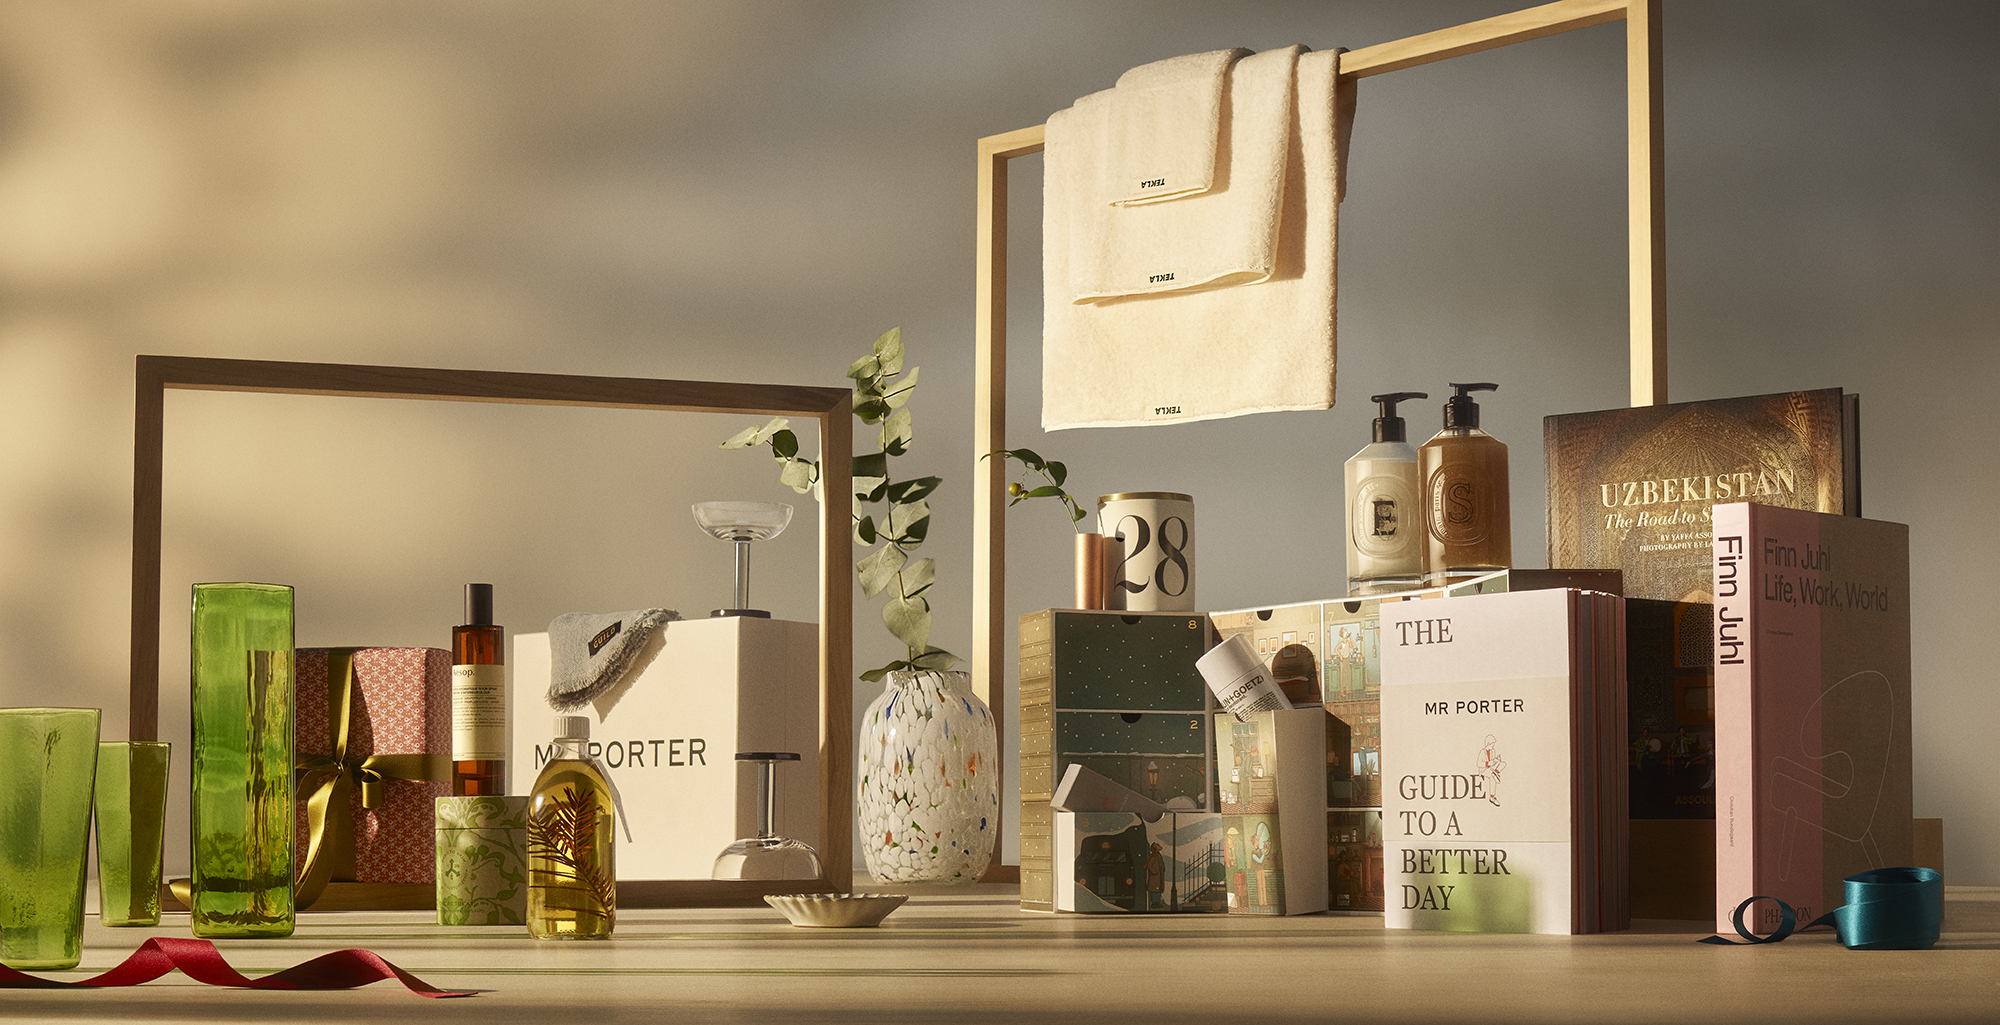 Mr Porter Launch Holiday Campaign “Give A Little Luxury”